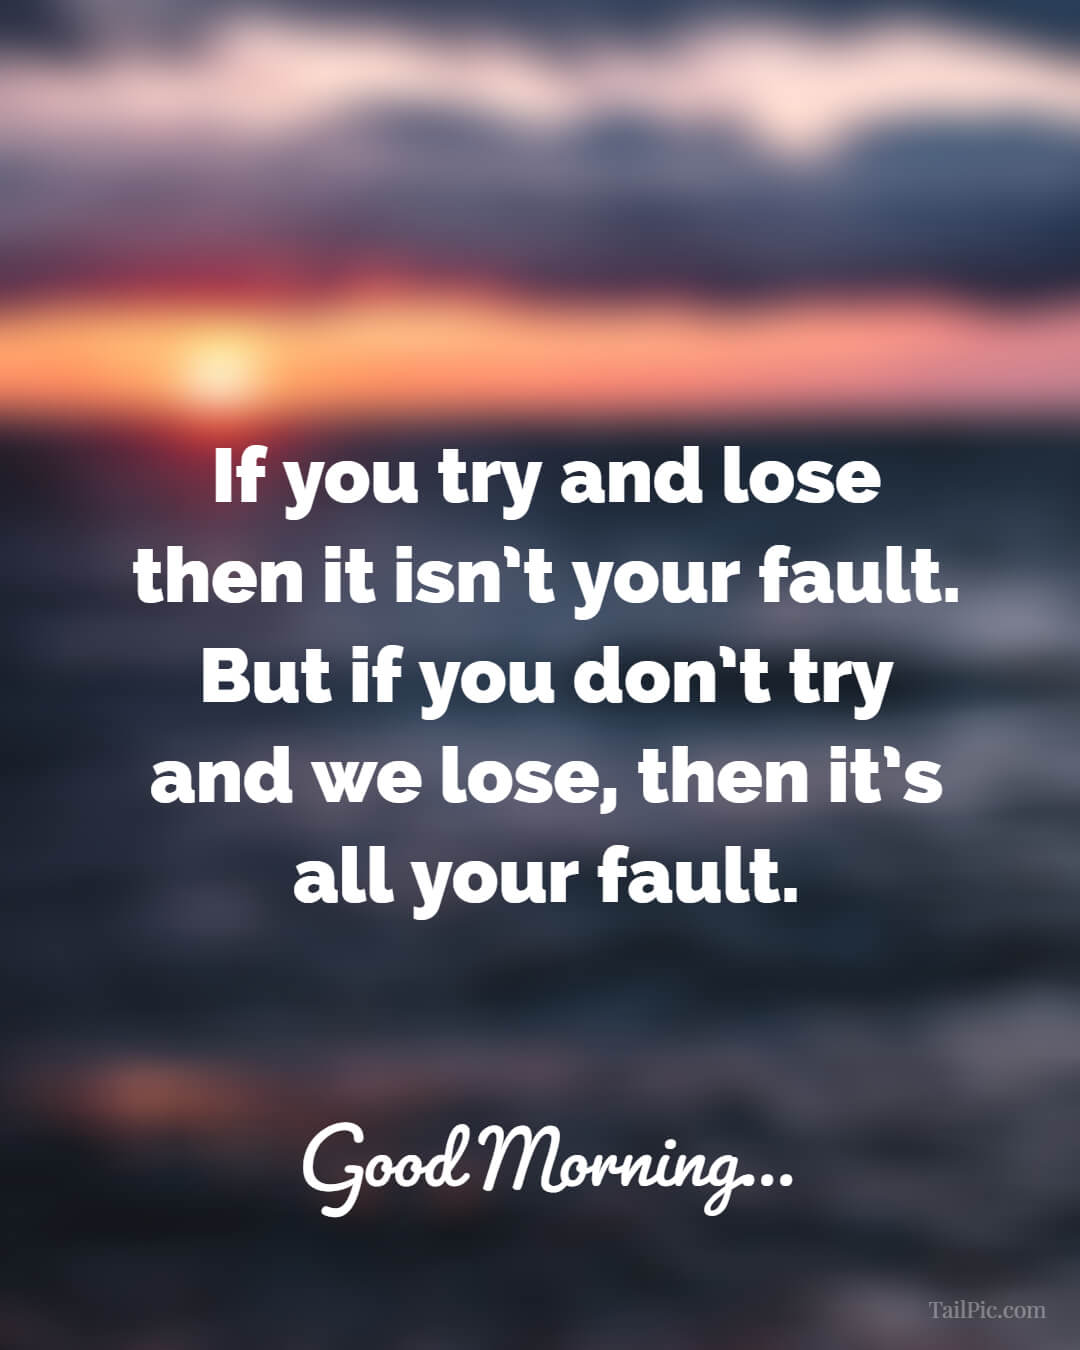 35 Good Morning Quotes And Images Positive Words for Good Morning 2